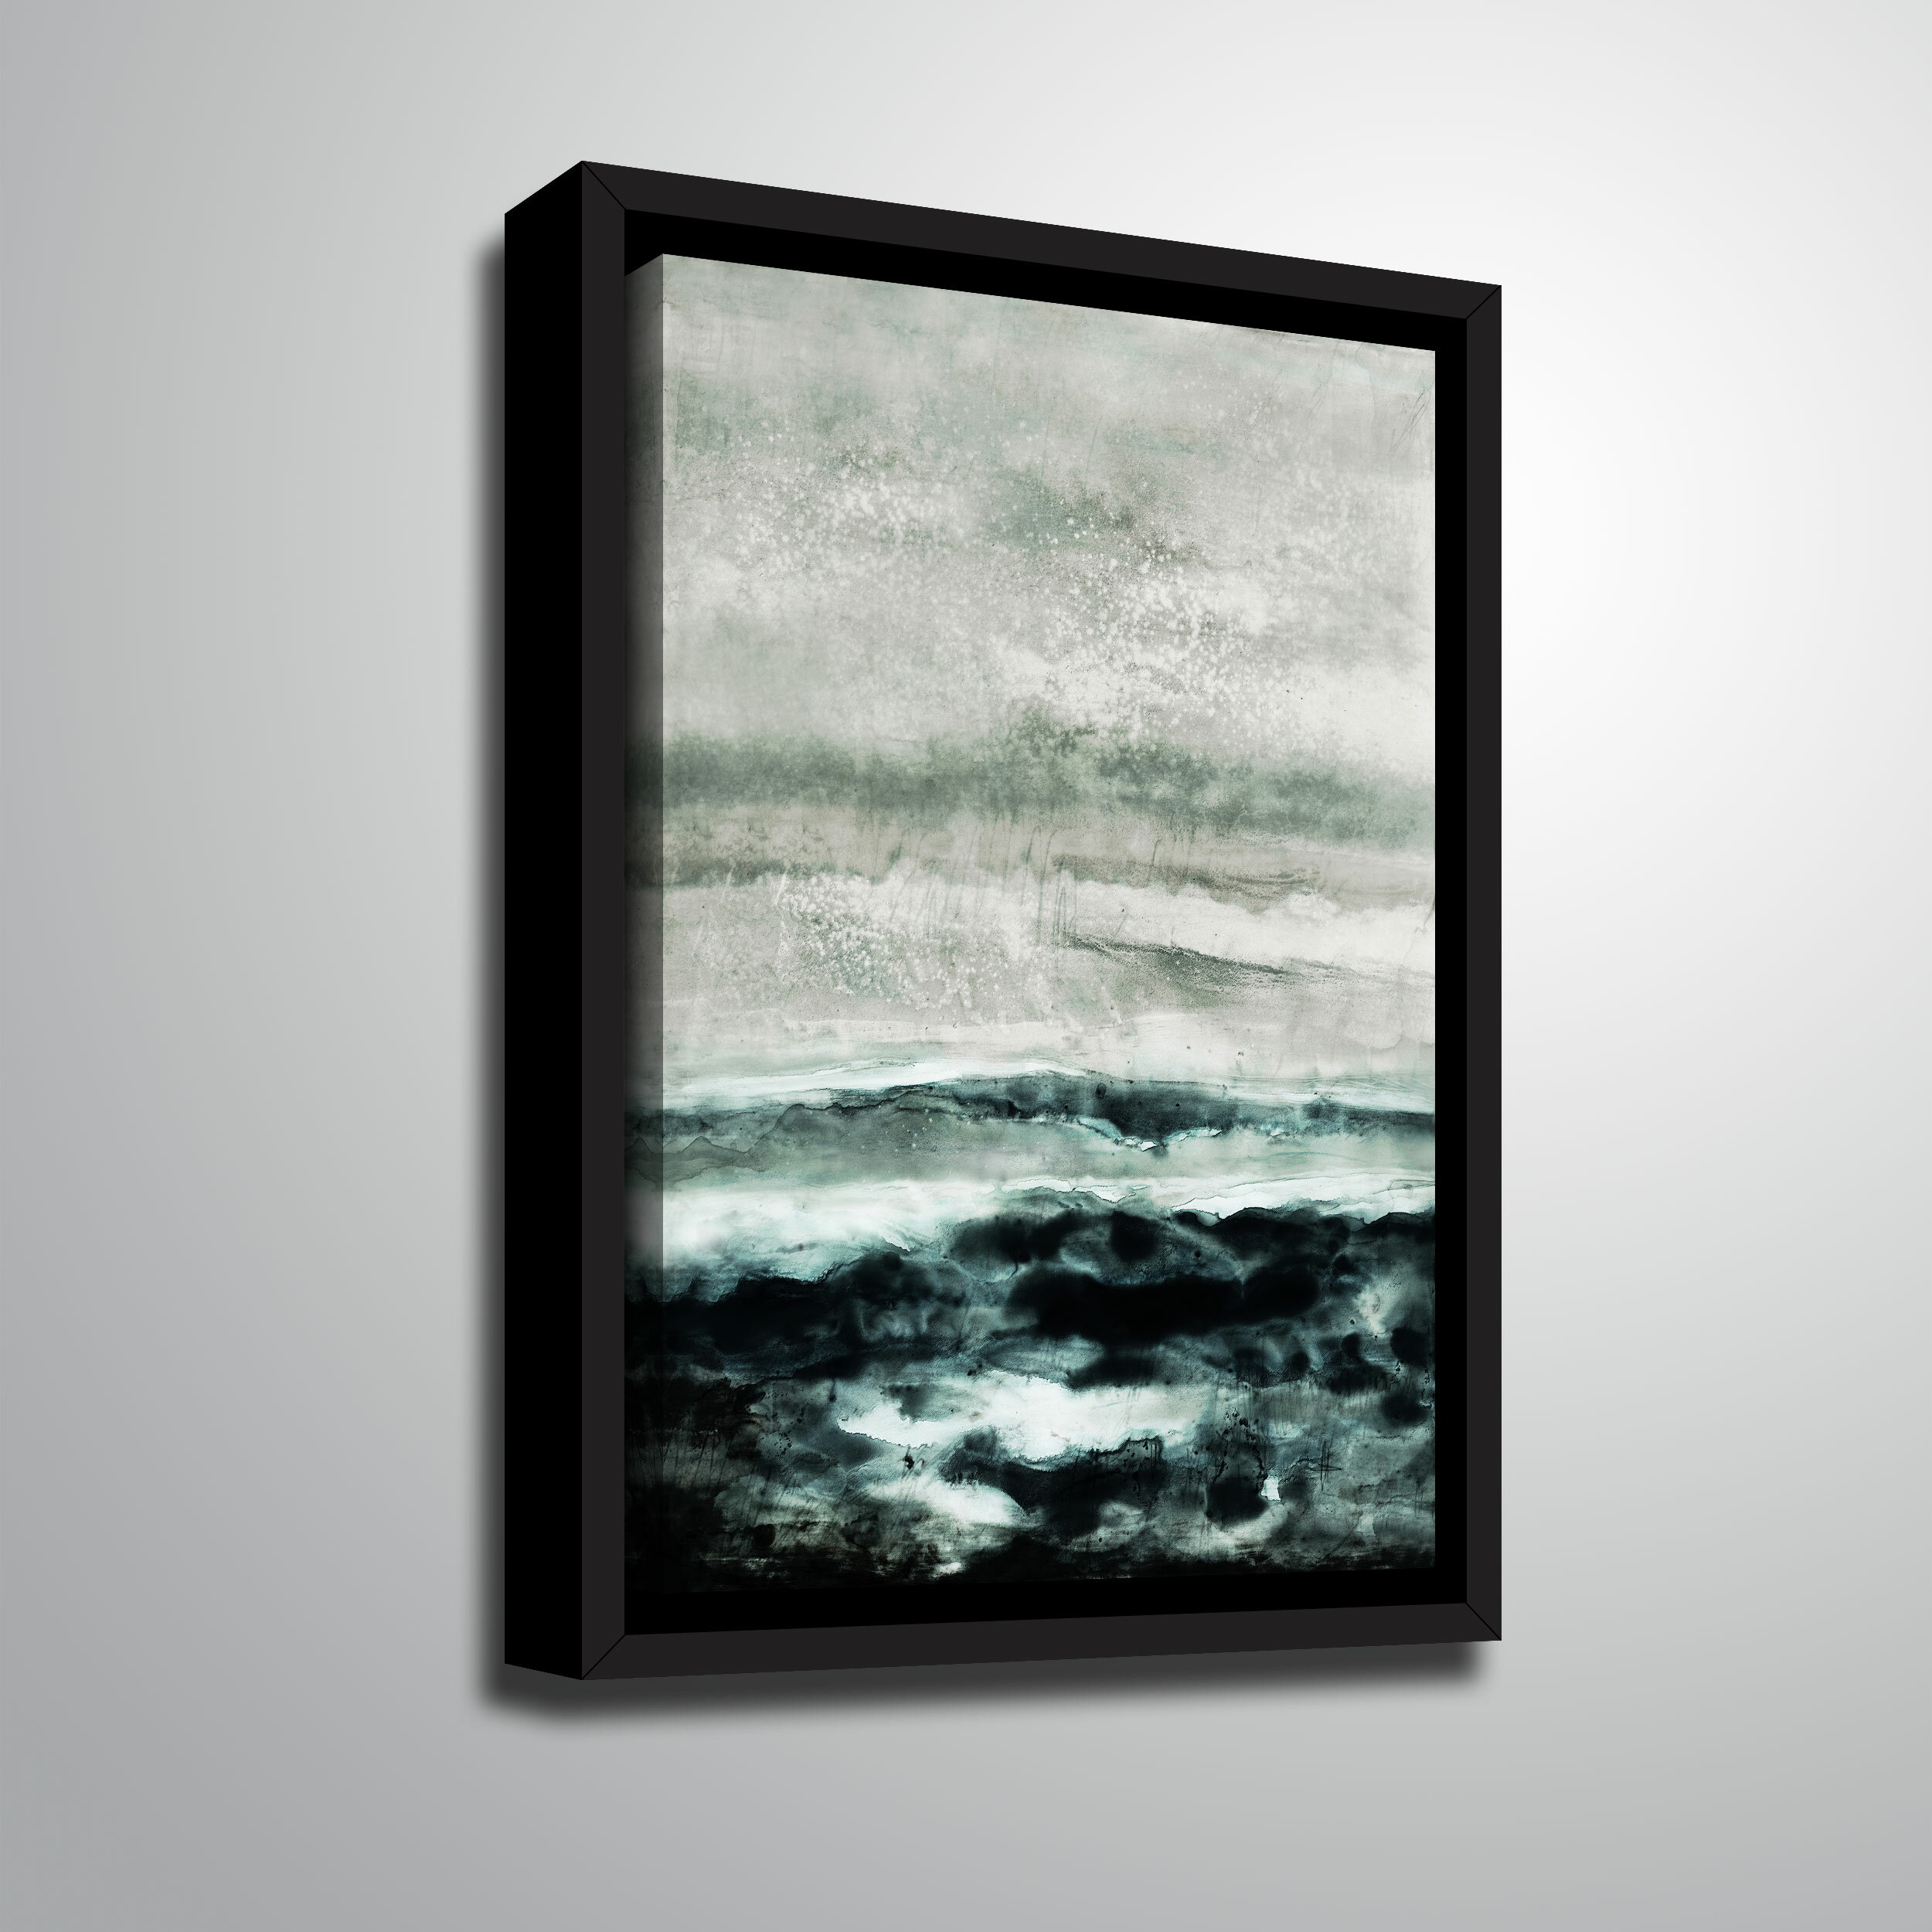 Abstract Waterscape Poster Print by Iris Lehnhardt 20 x 28 